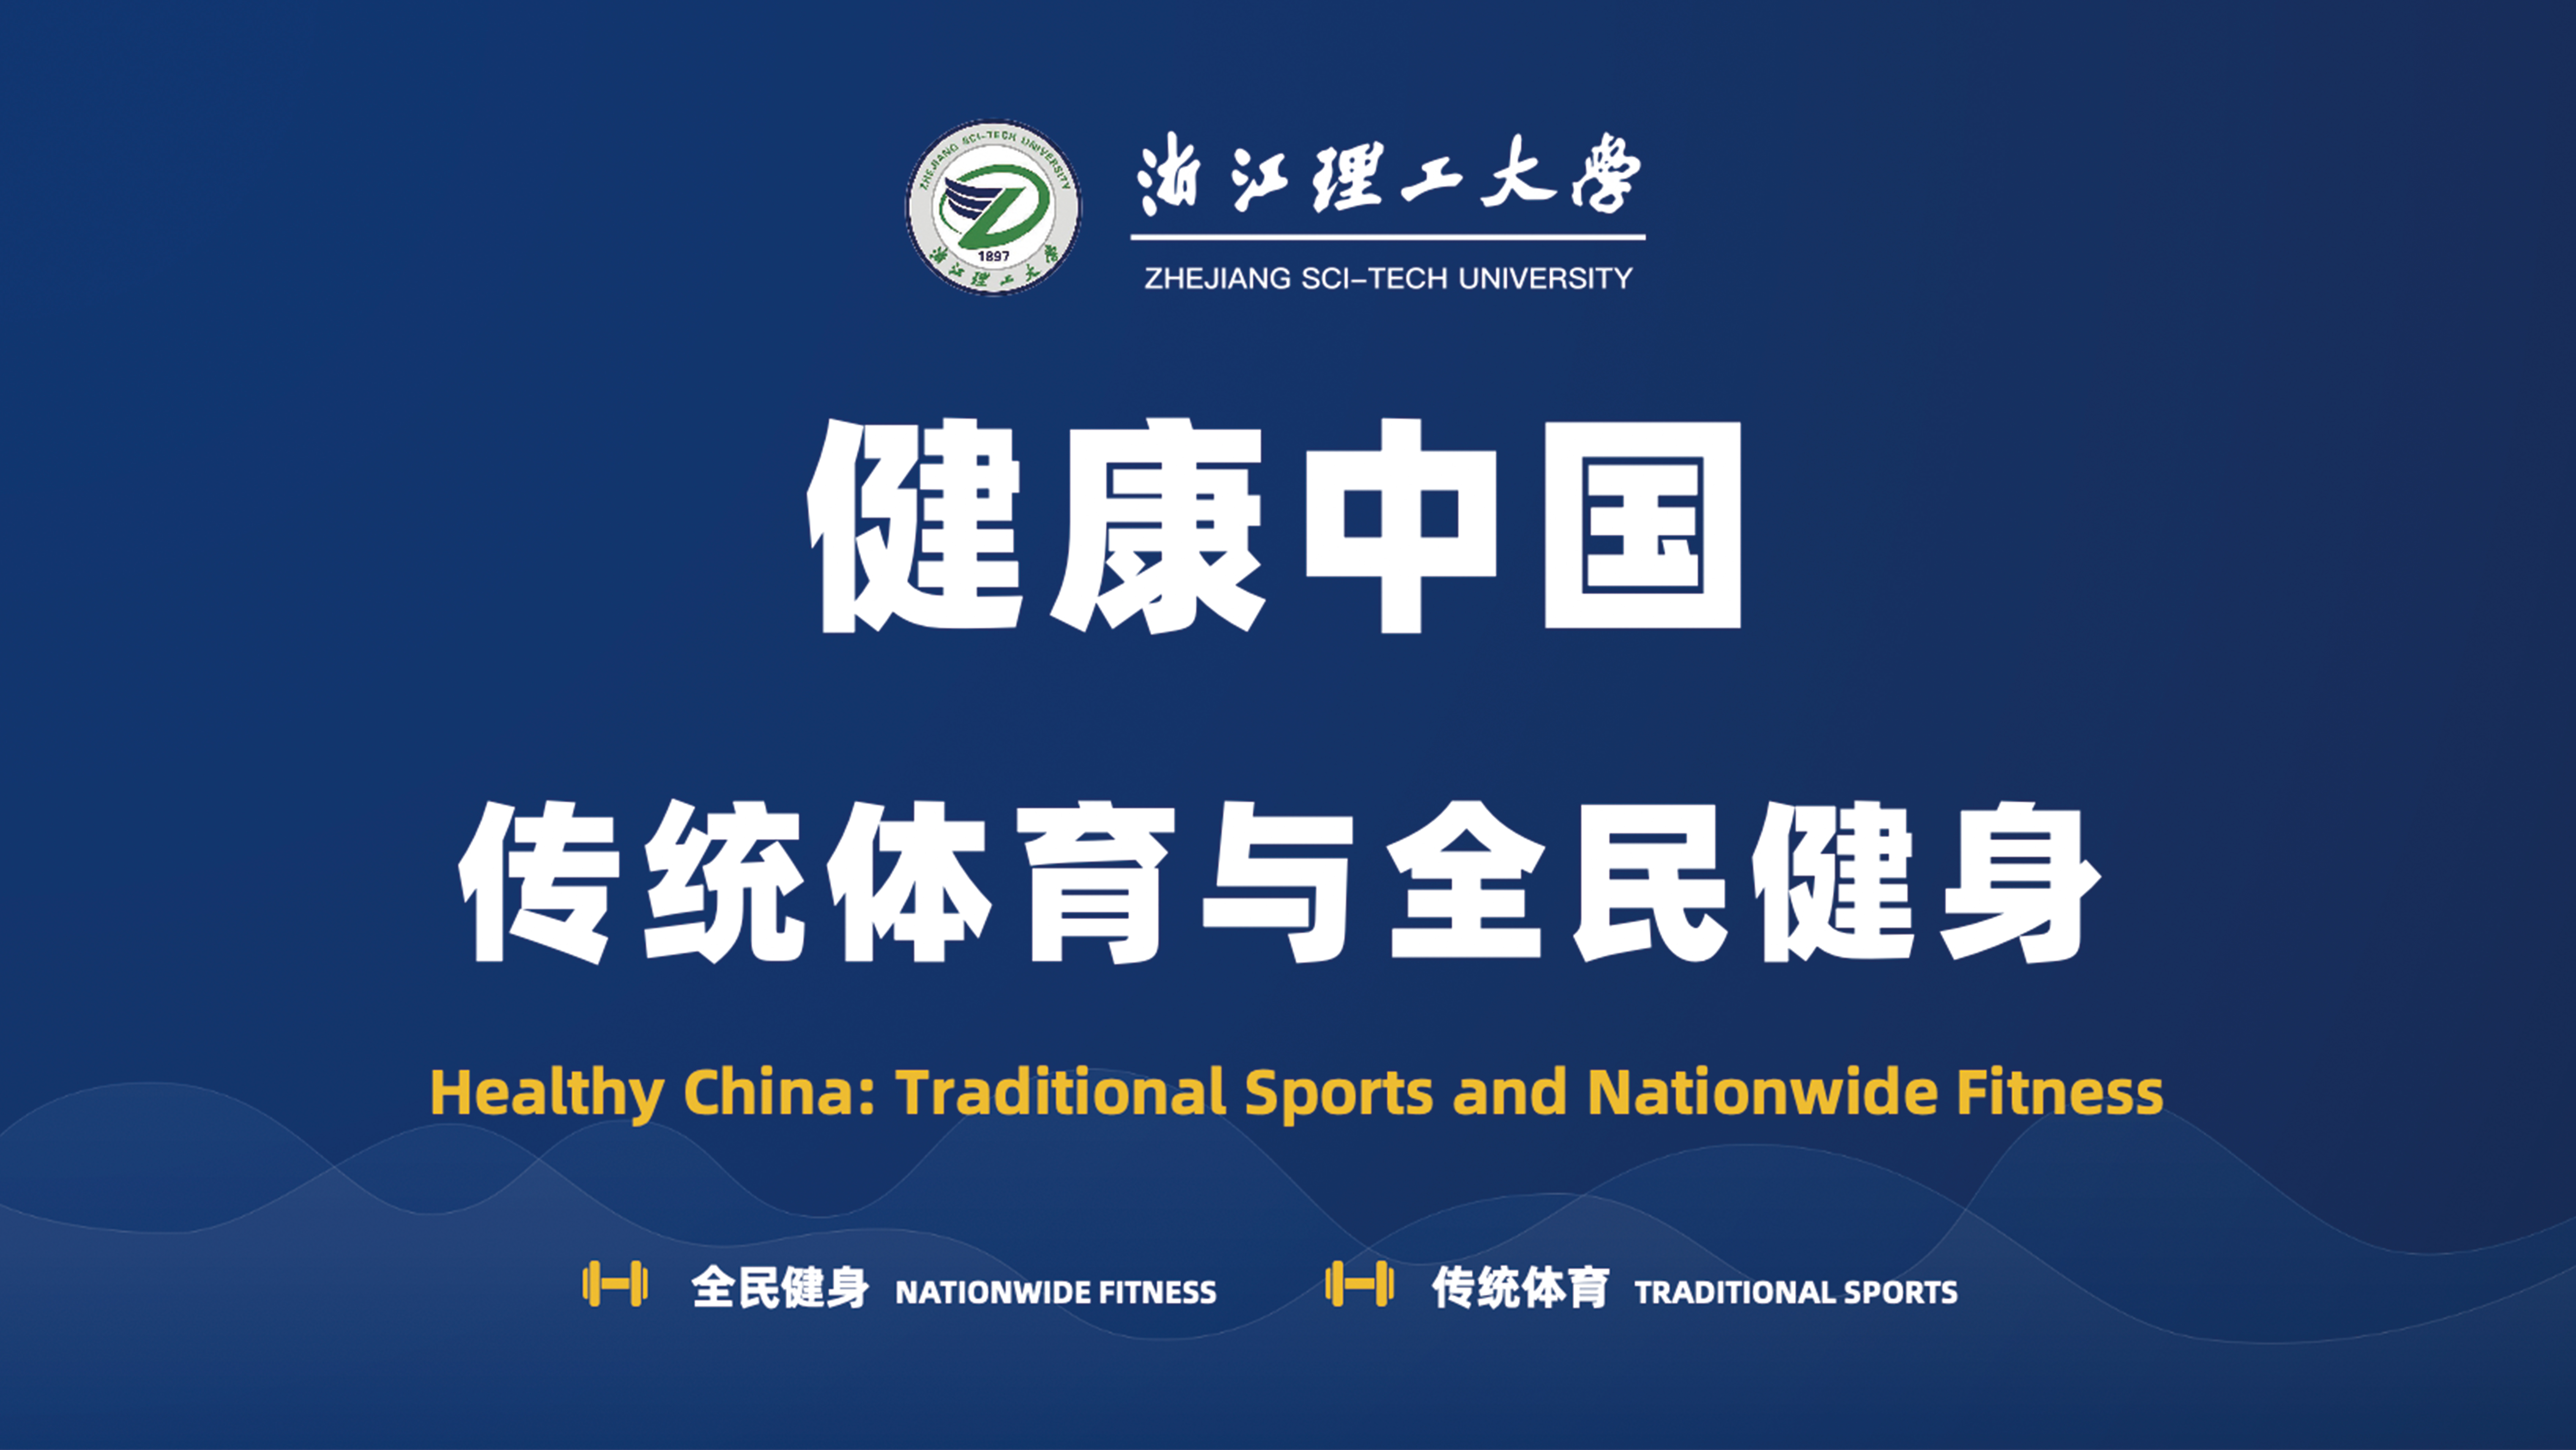 Healthy China: Traditional Sports and Nationwide Fitness